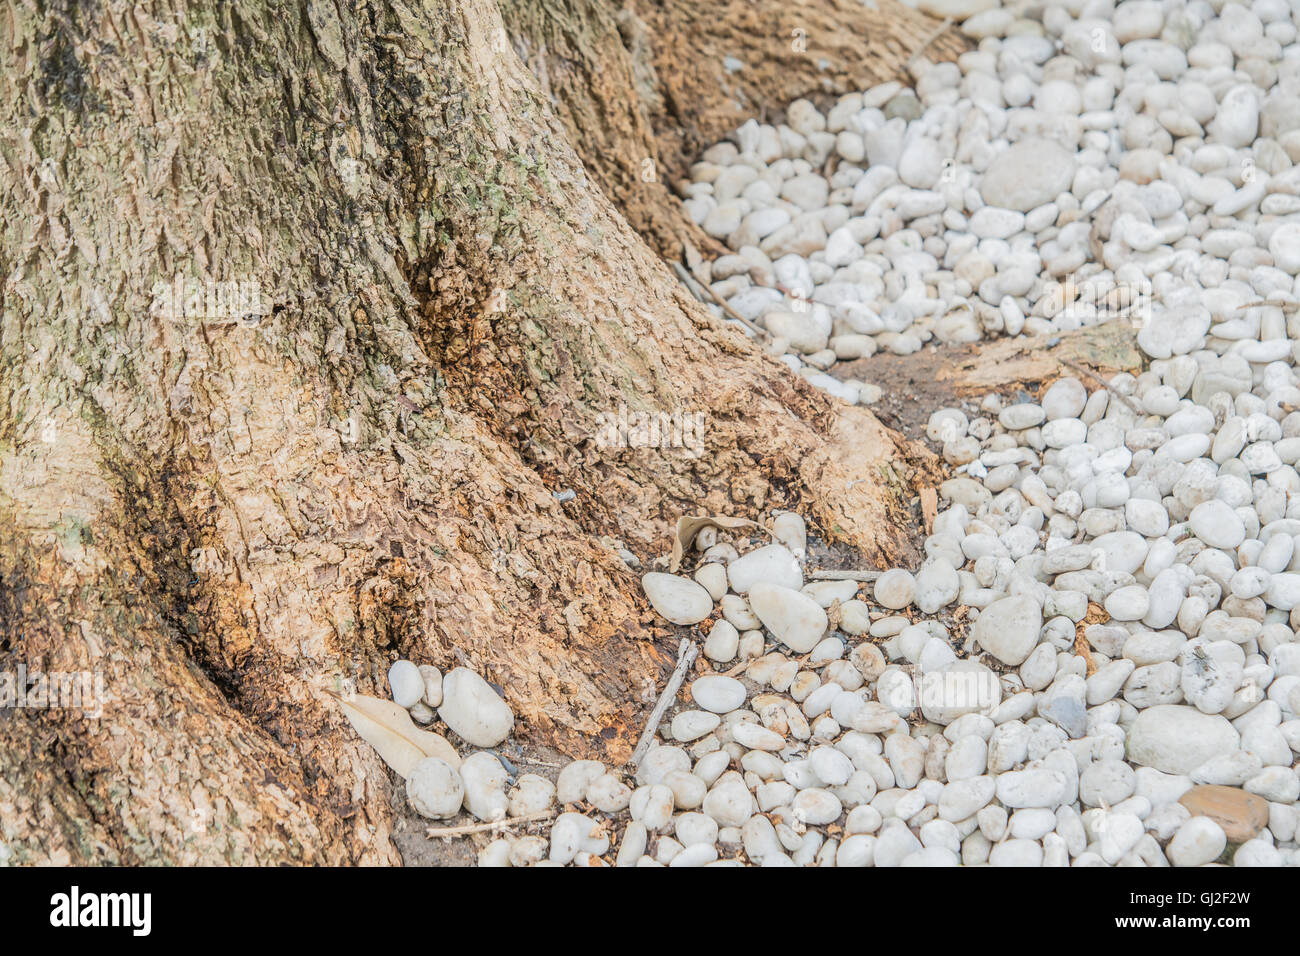 Tree roots surrounded with white pebbles Stock Photo